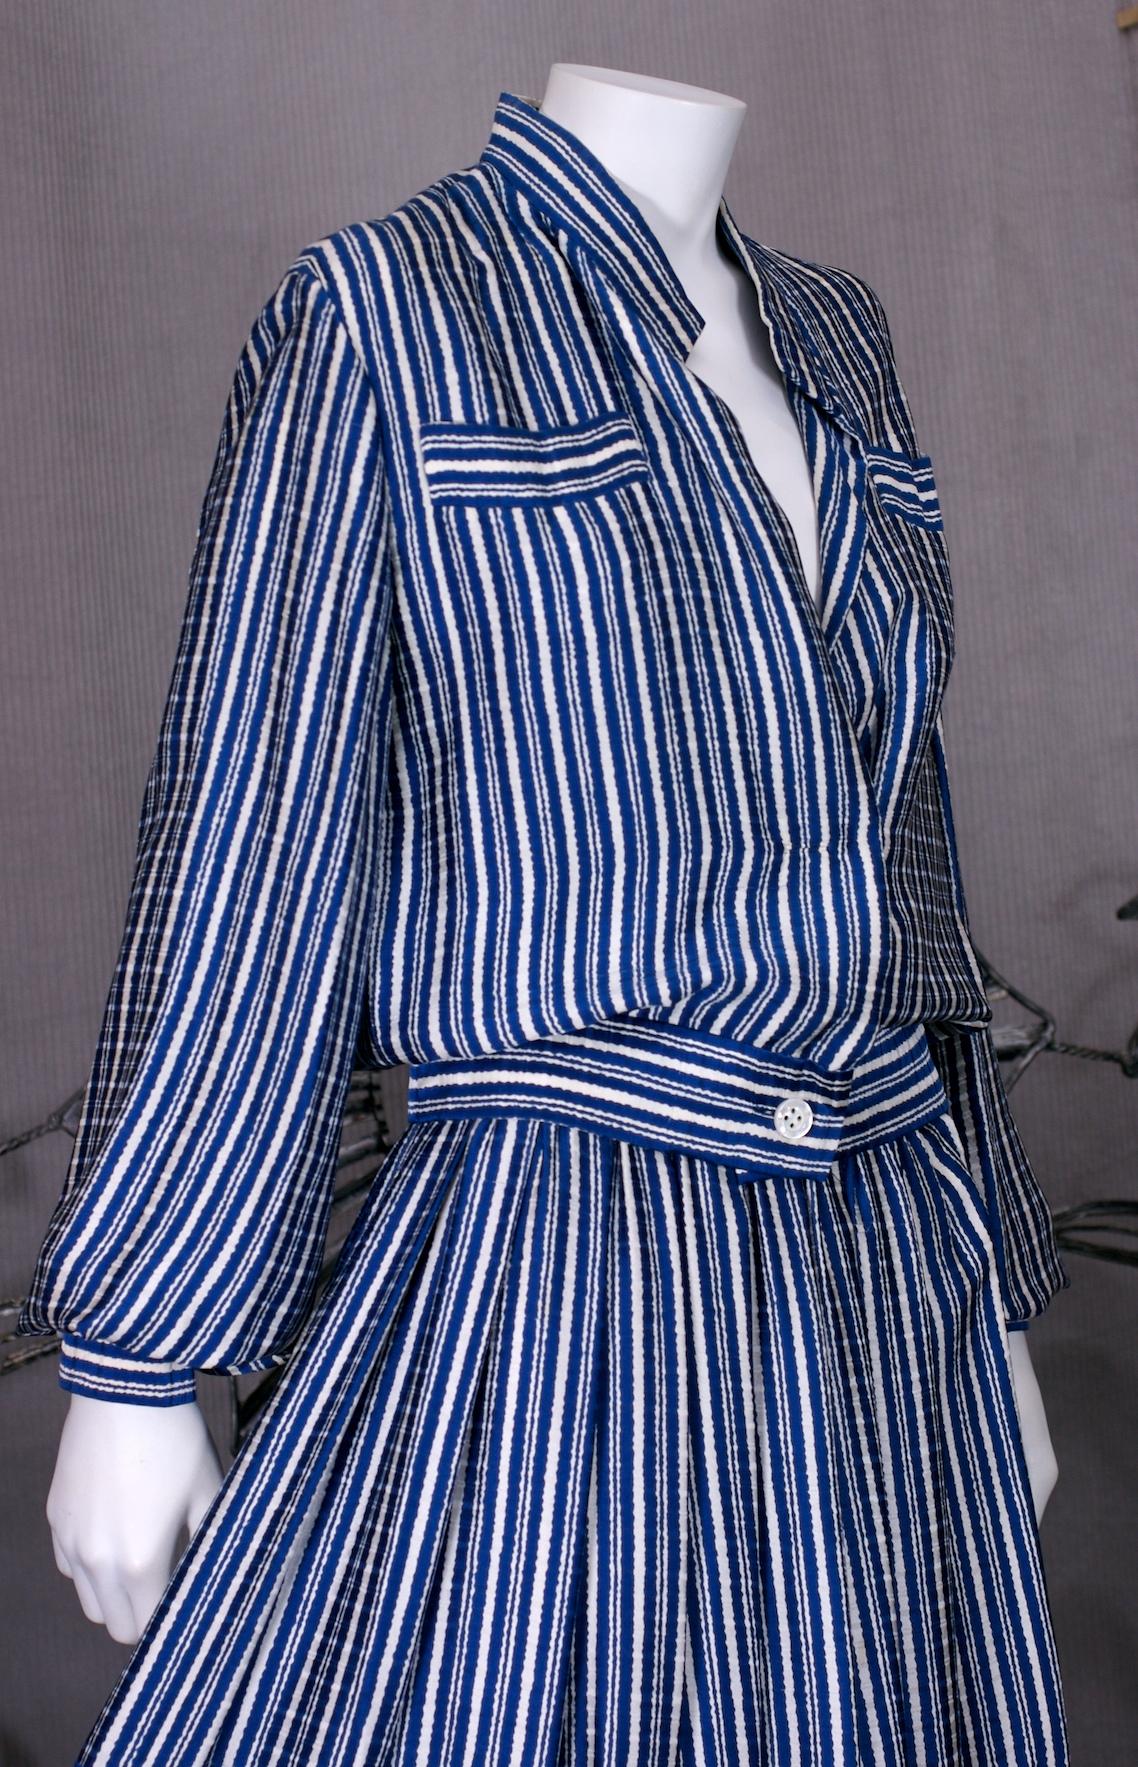 Galanos Silk Crepe Striped 2 Pc Dress In Excellent Condition For Sale In New York, NY